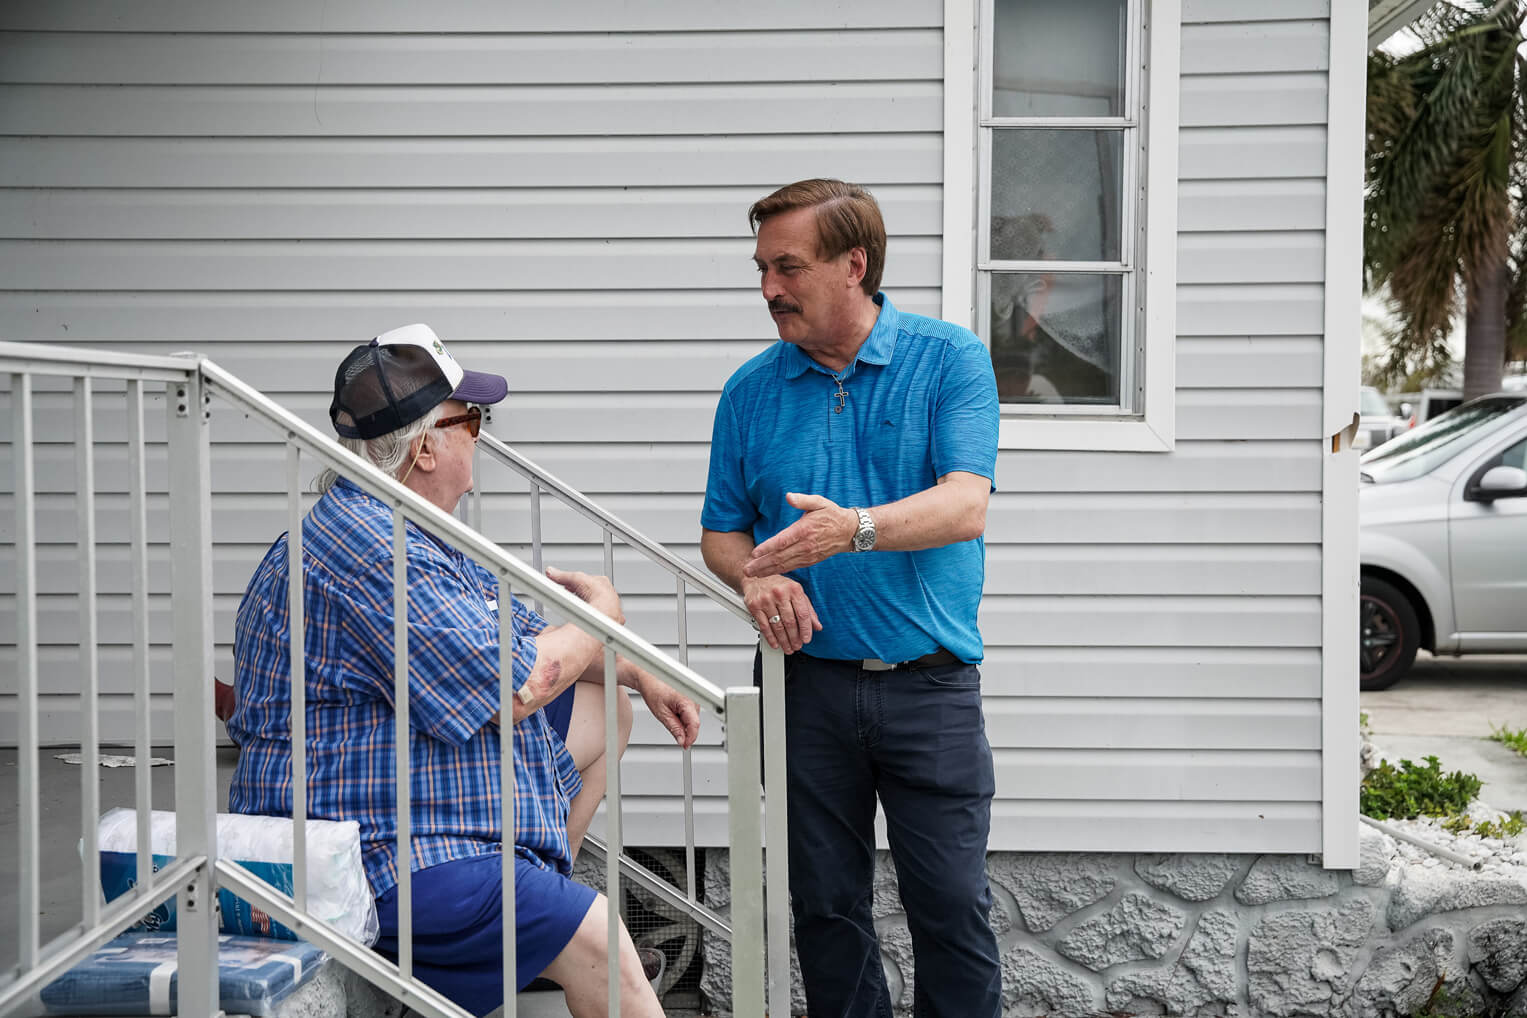 Mike Lindell encouraged Lenny Egan, a 79-year-old disabled veteran.